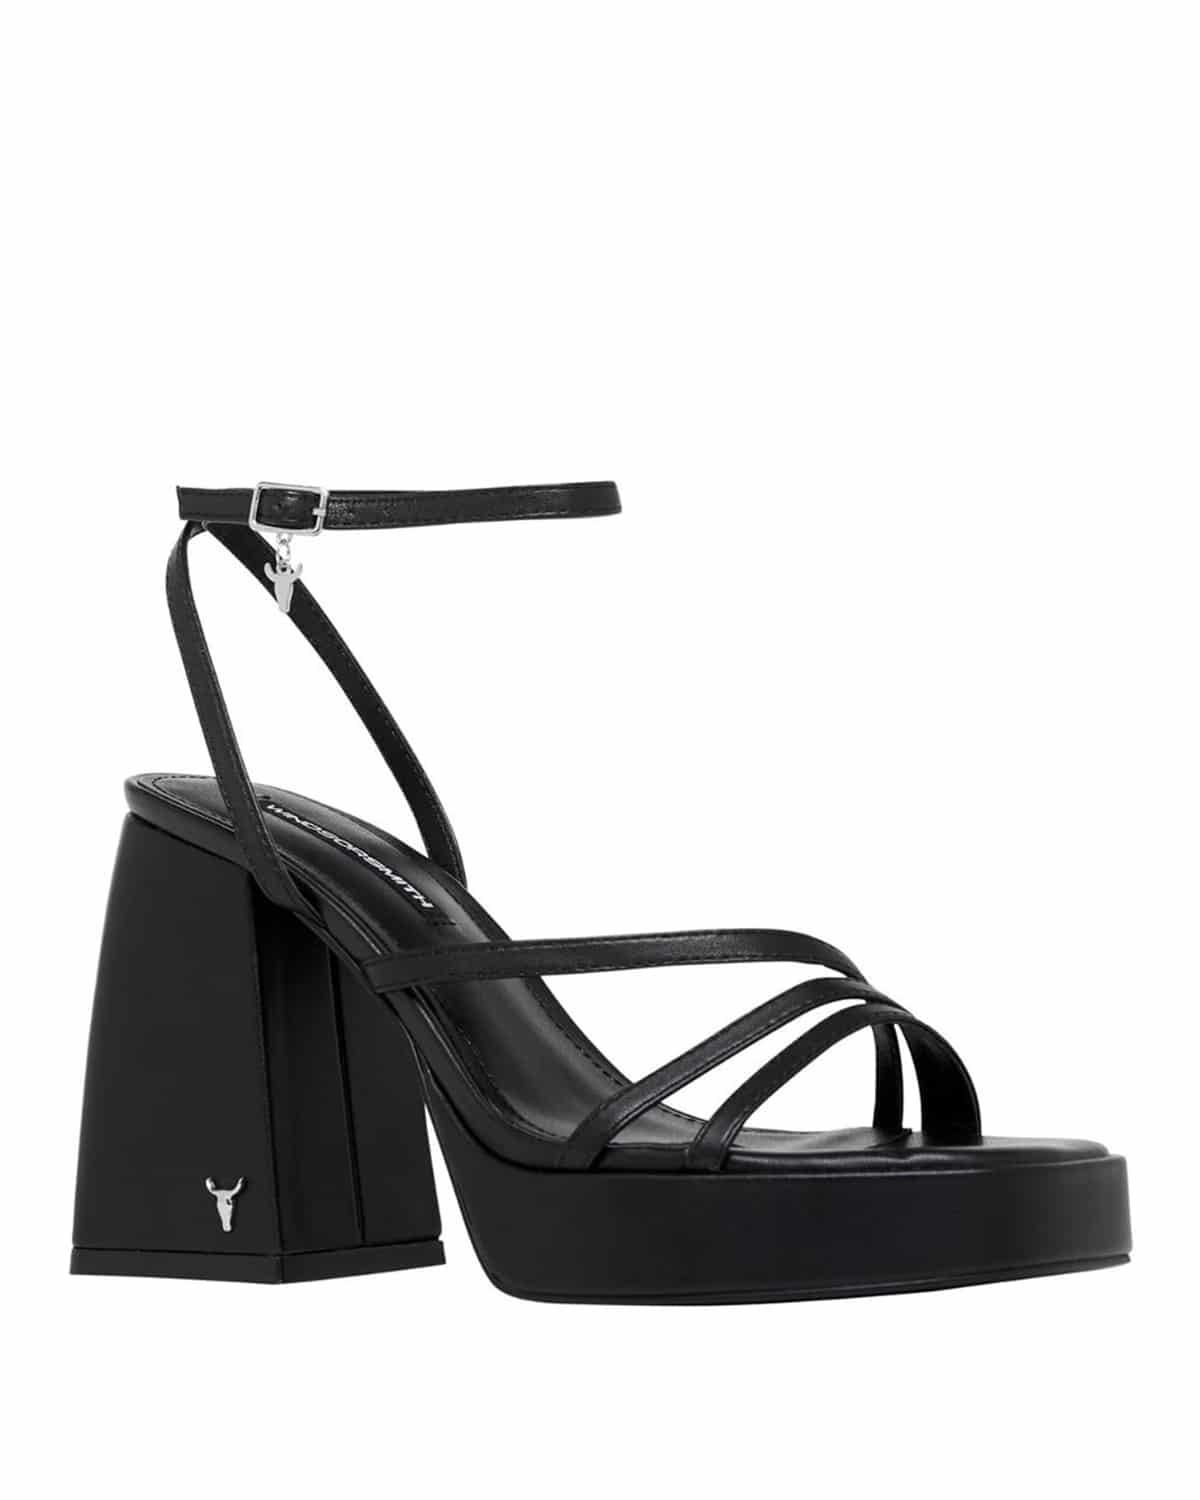 Black leather heels - Anna shoes & more